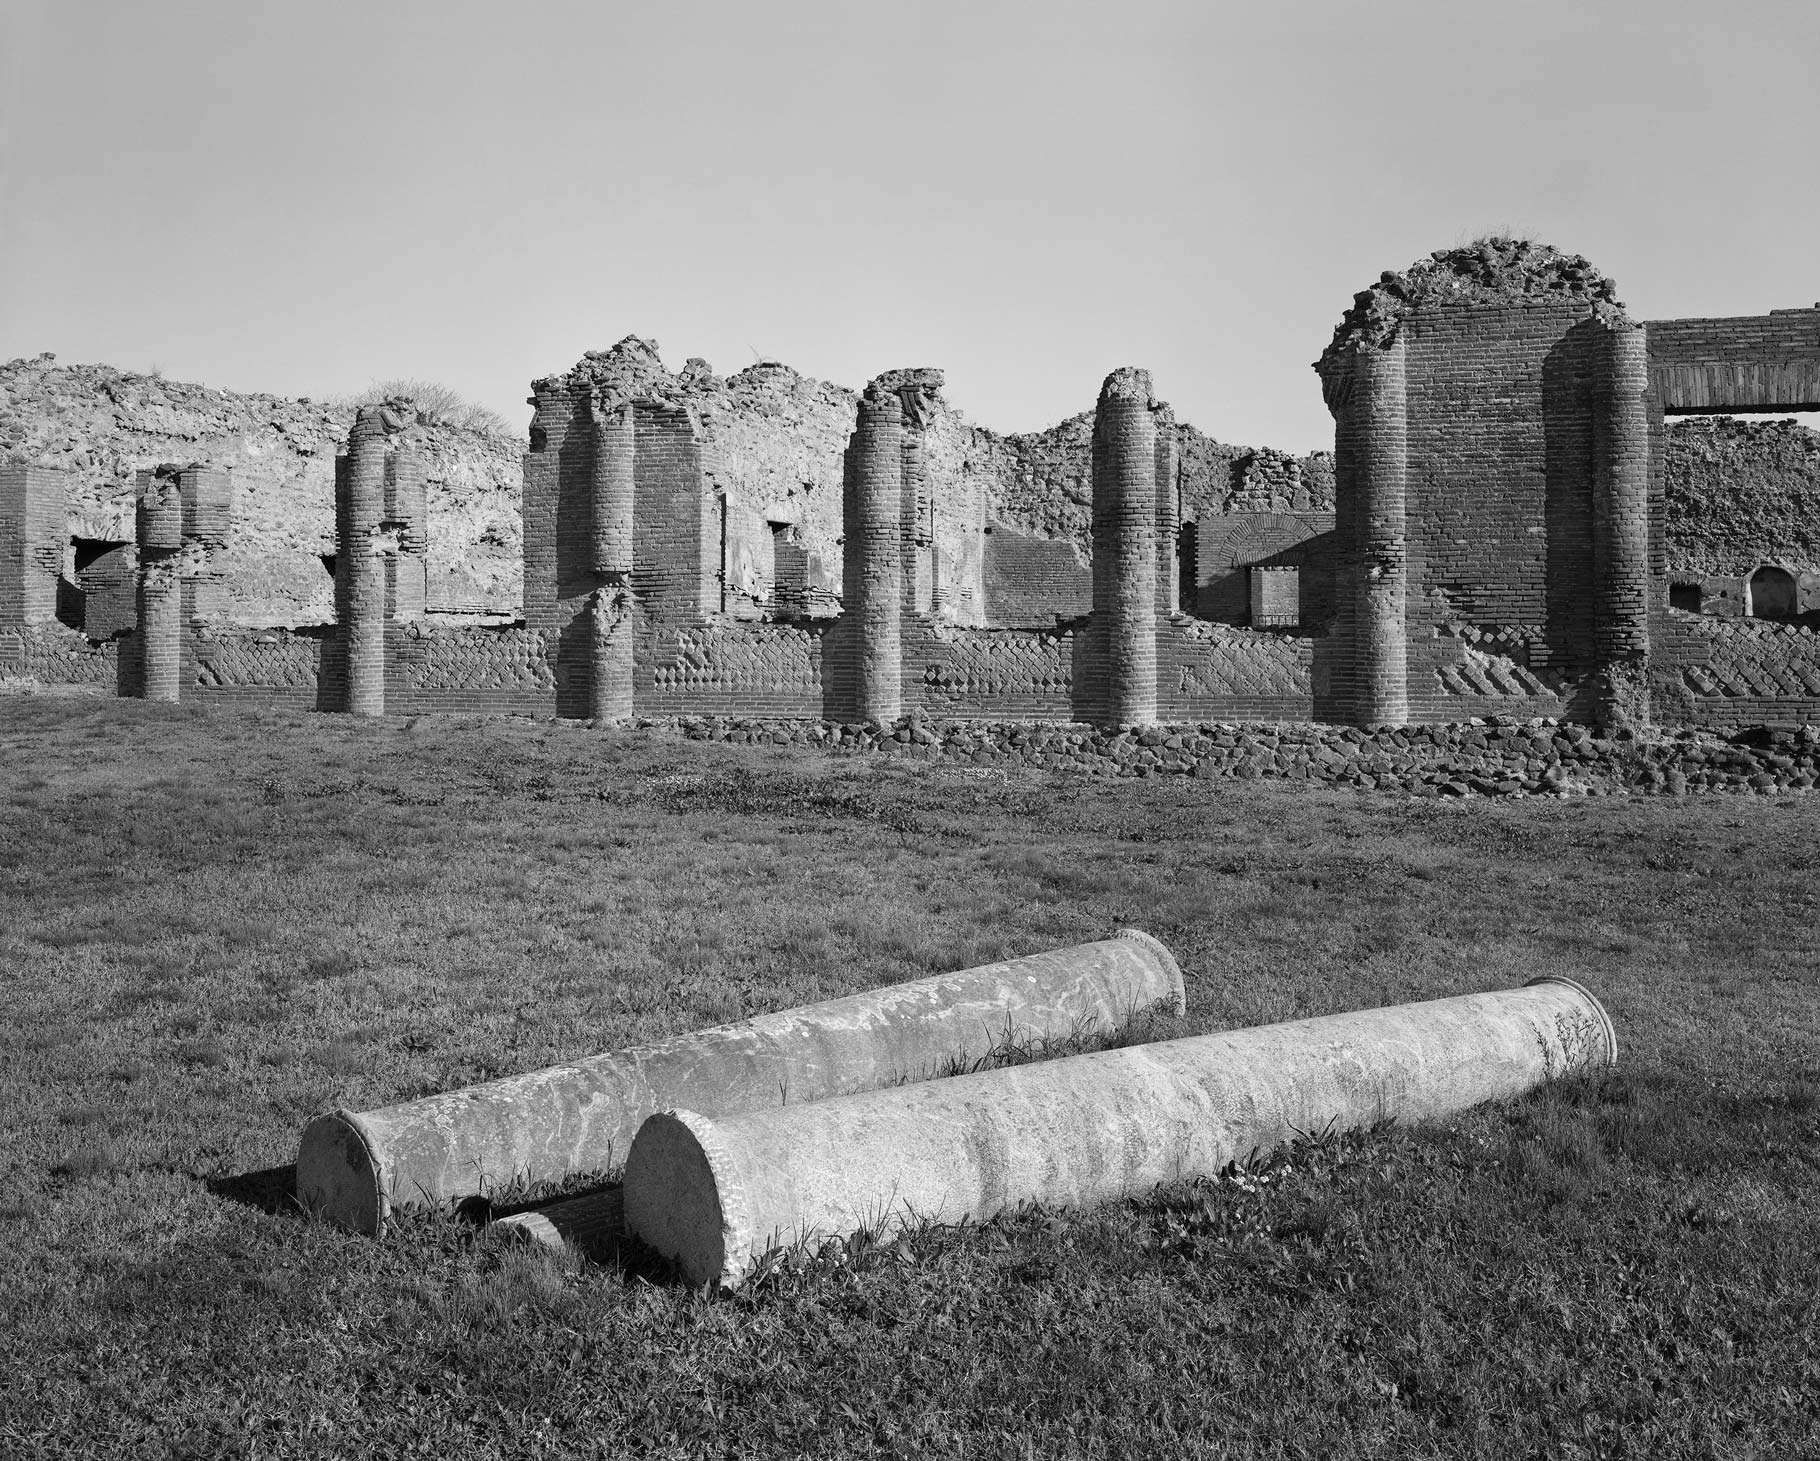 Broken walls and pillars of a building in pompeii, black and white image